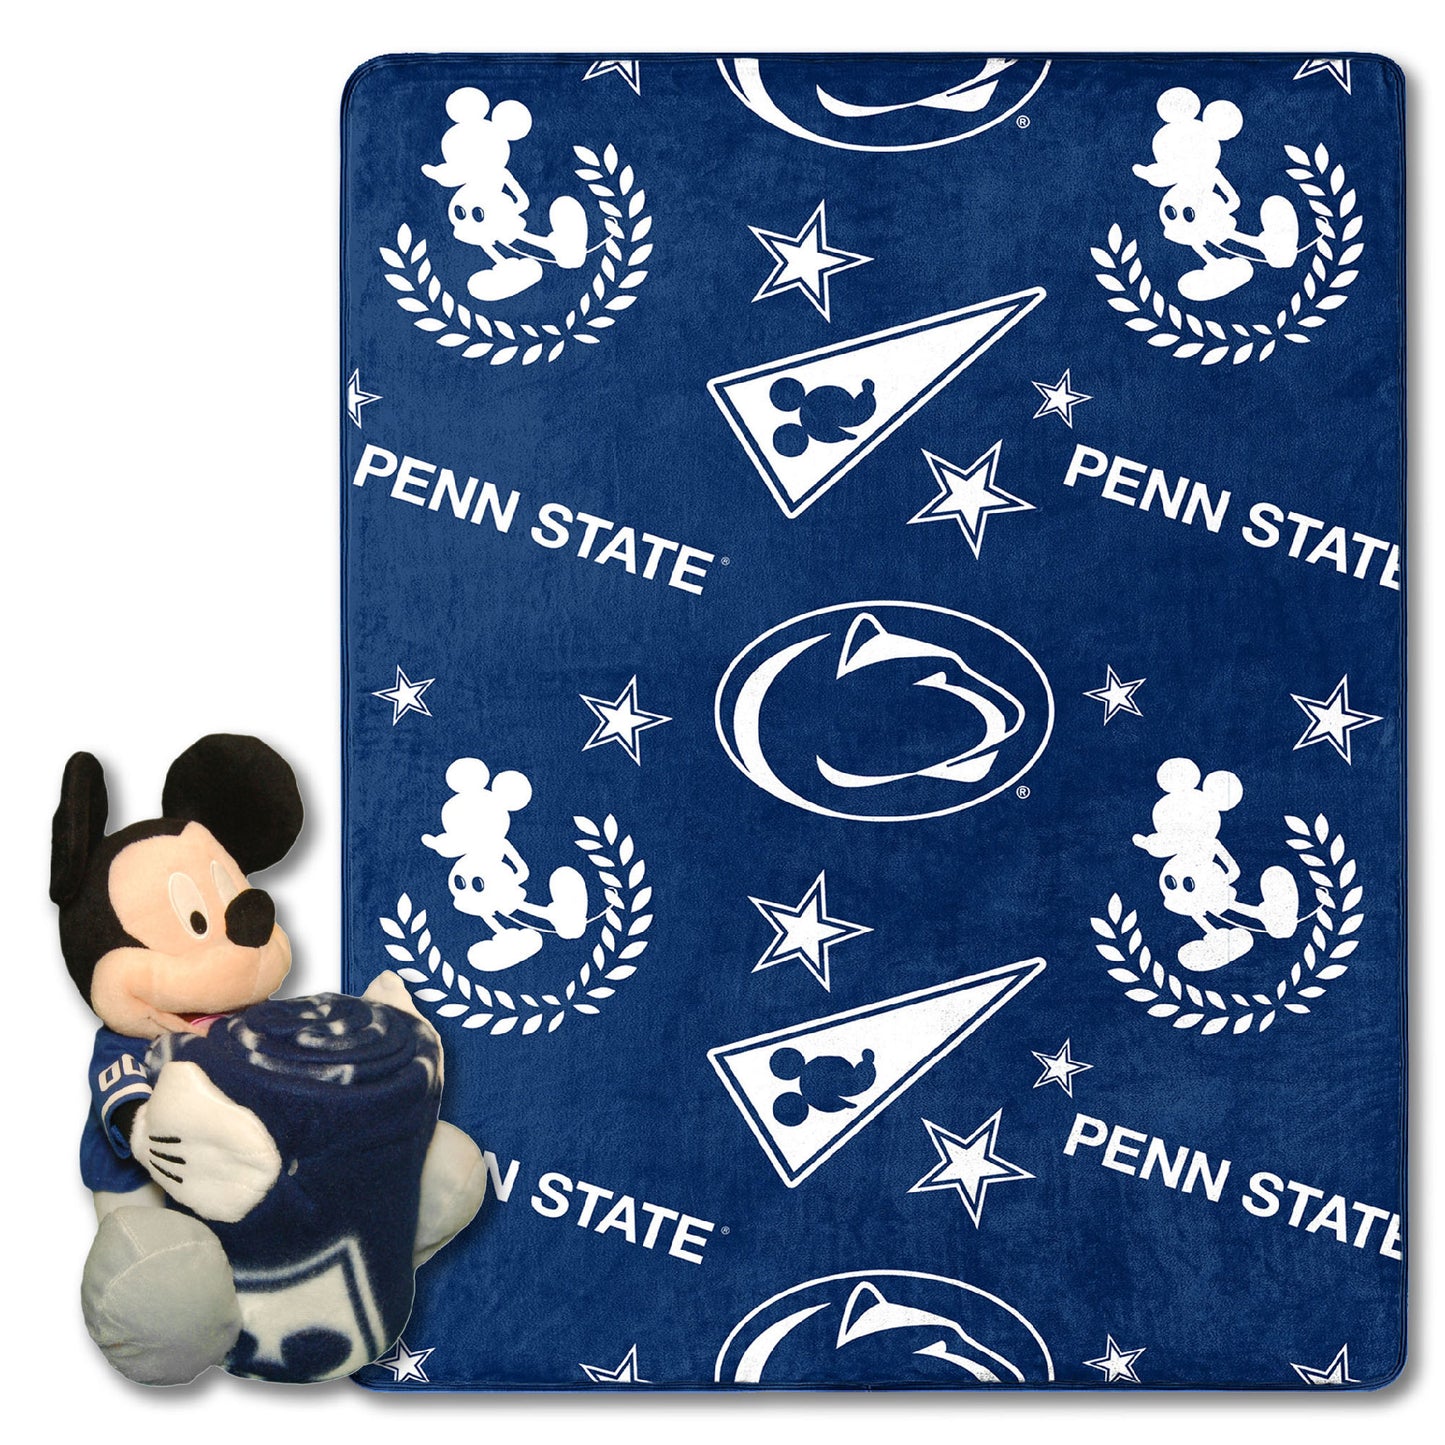 Penn State OFFICIAL NCAA & Disney's Mickey Mouse Character Hugger Pillow & Silk Touch Throw Set